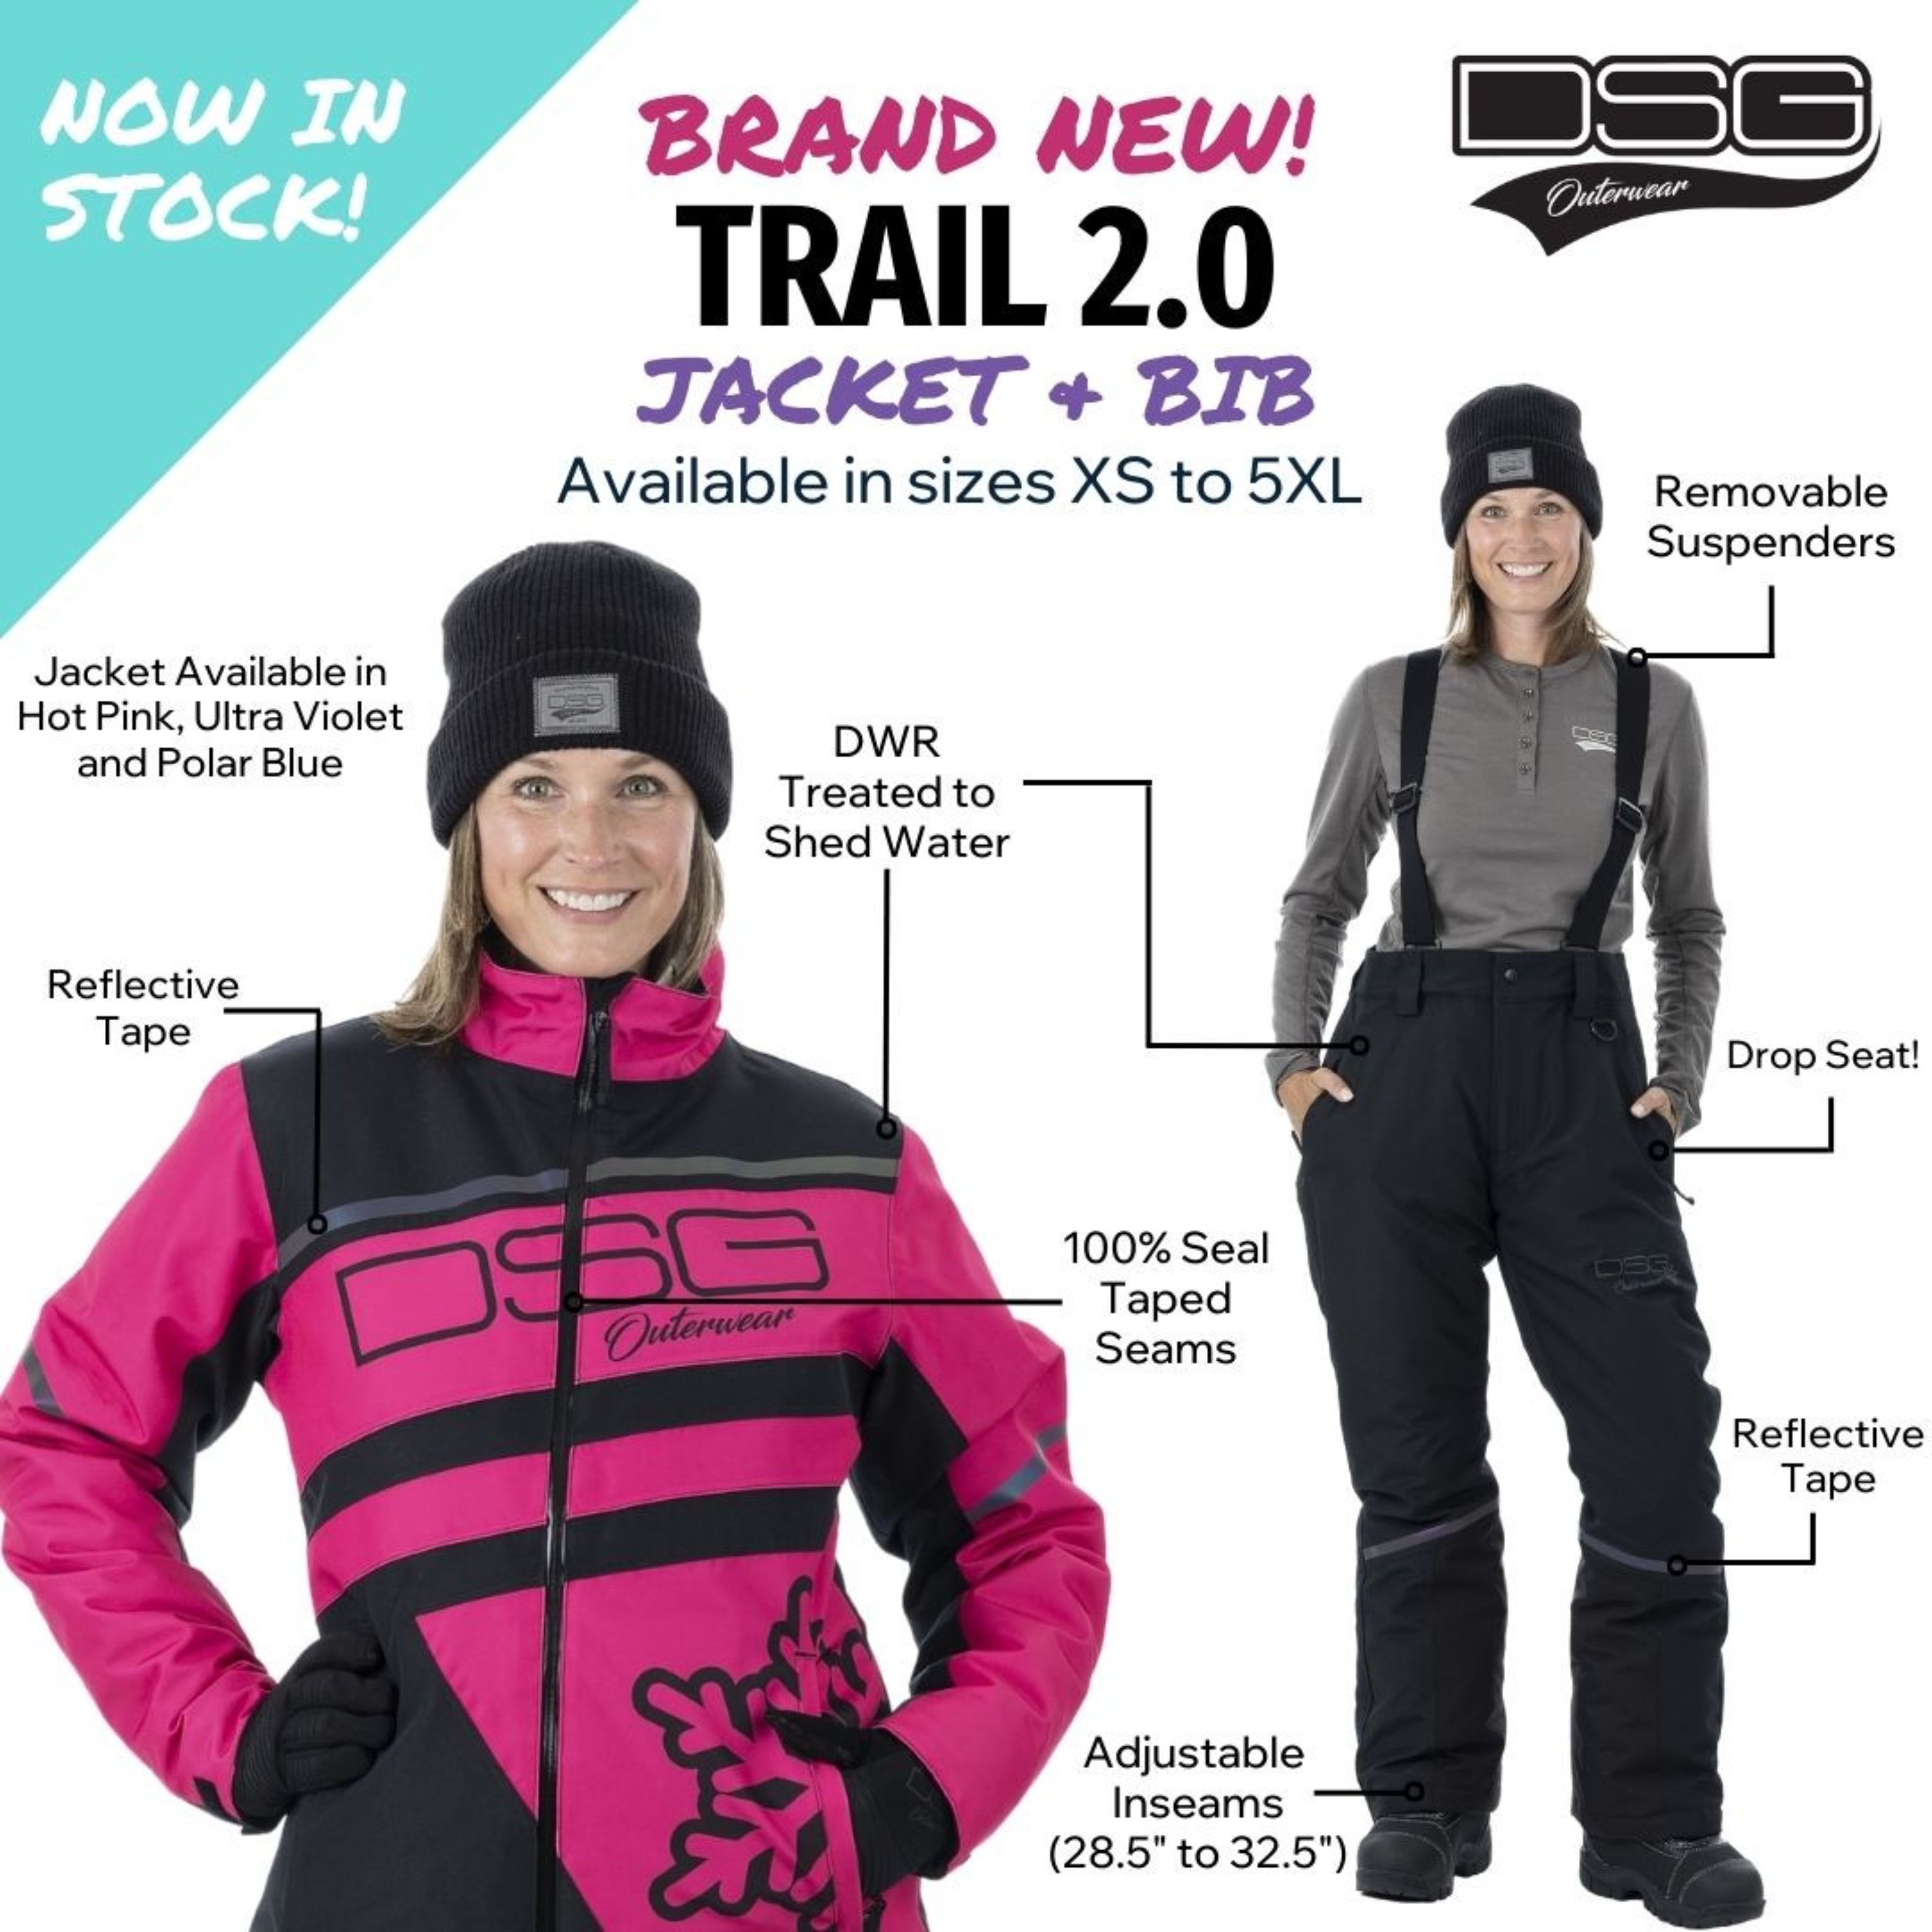 DSG Outerwear Trail Jacket 2.0 for Ladies